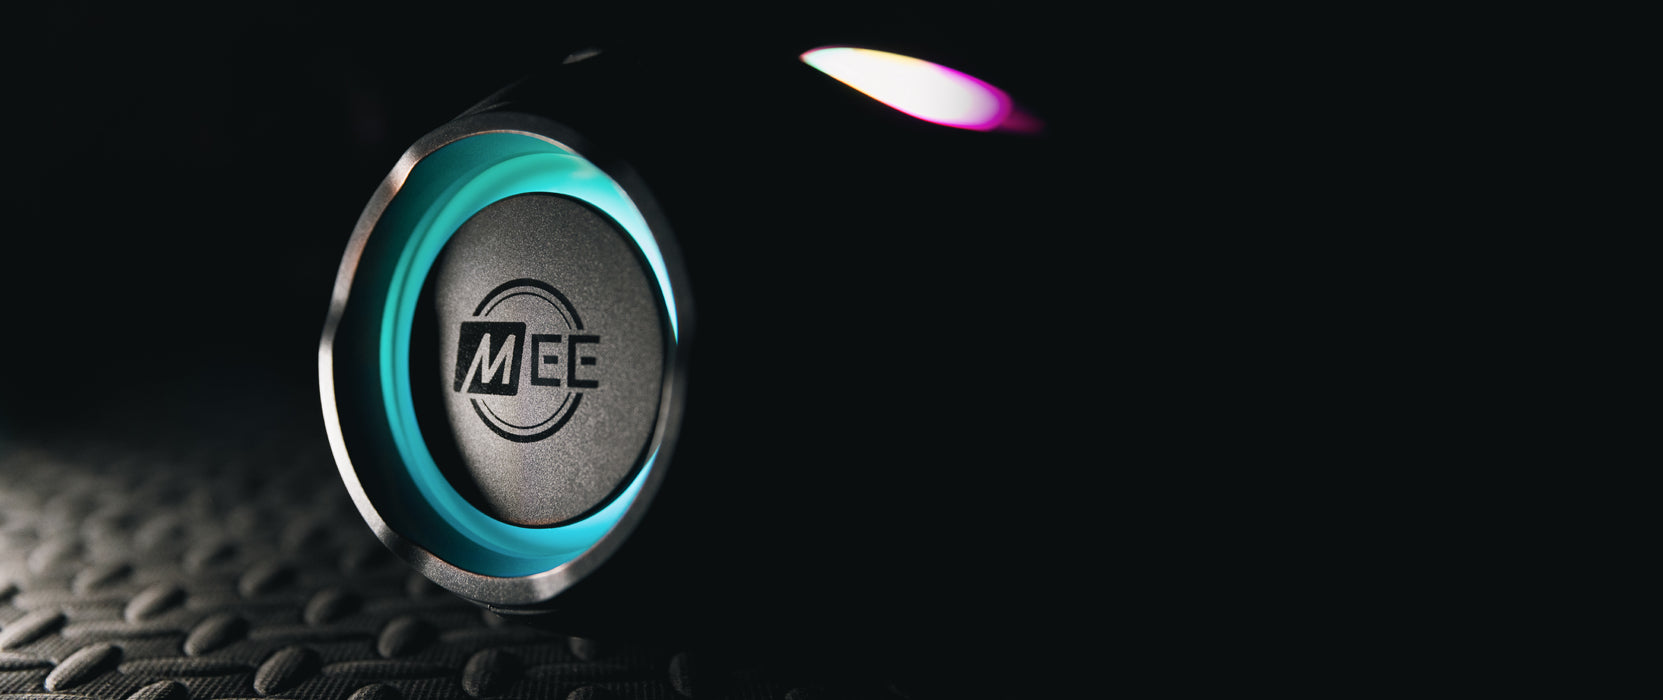 Close-up of a sleek, modern headphone speaker with a glowing blue light and the logo "mee" illuminated, set against a black textured background.